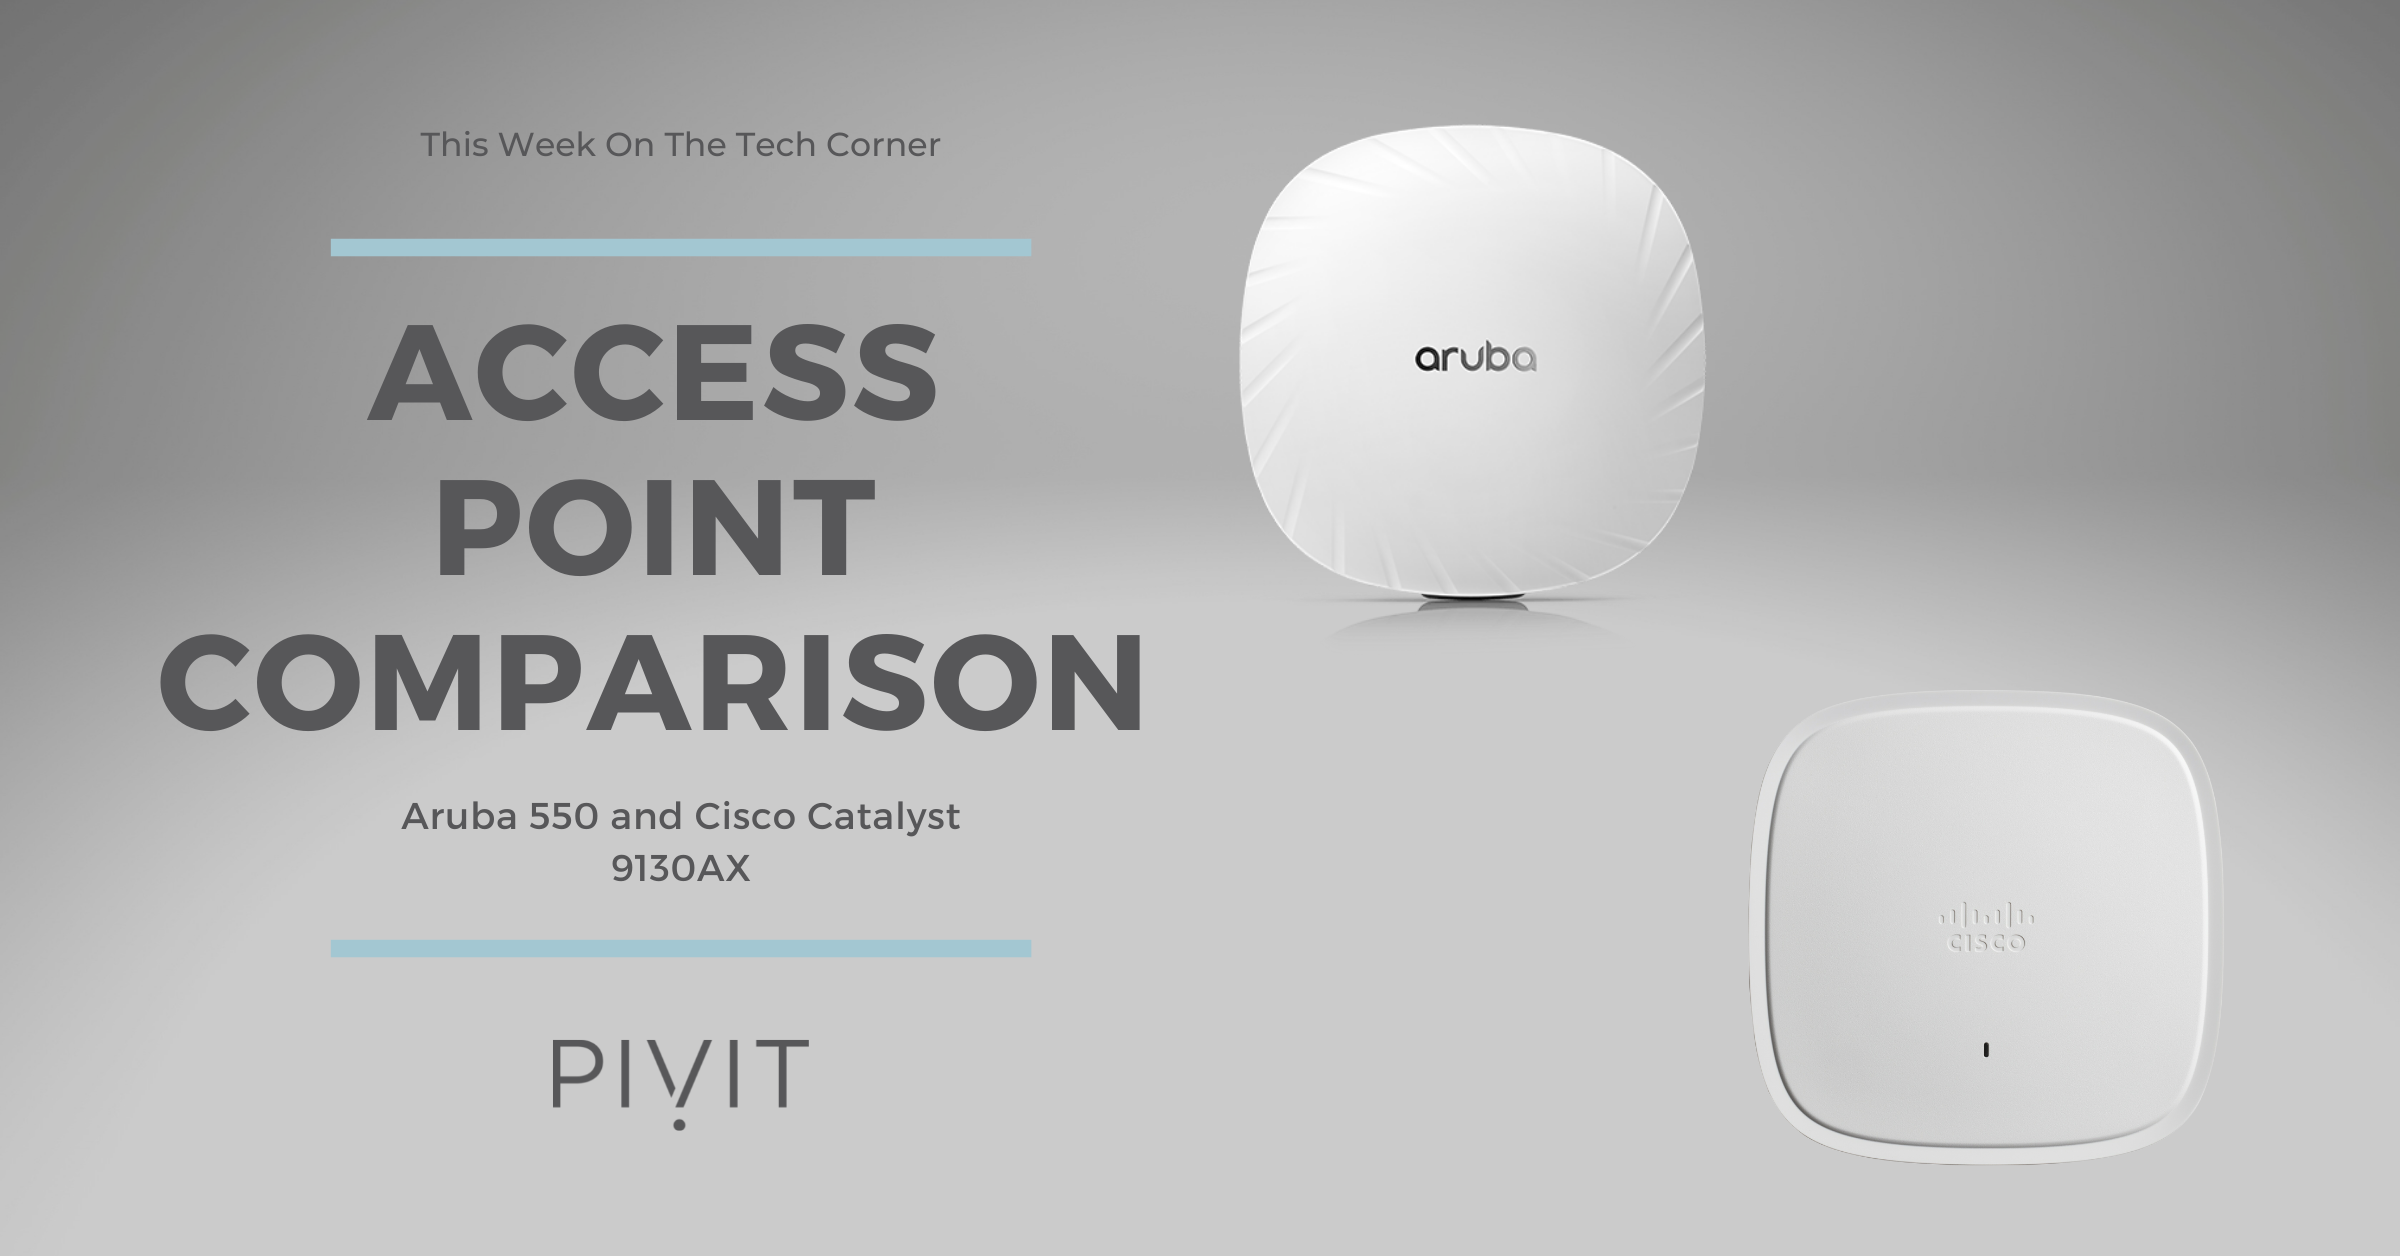 Access point comparison featured image for the Aruba 550 and Cisco Catalyst 9130AX